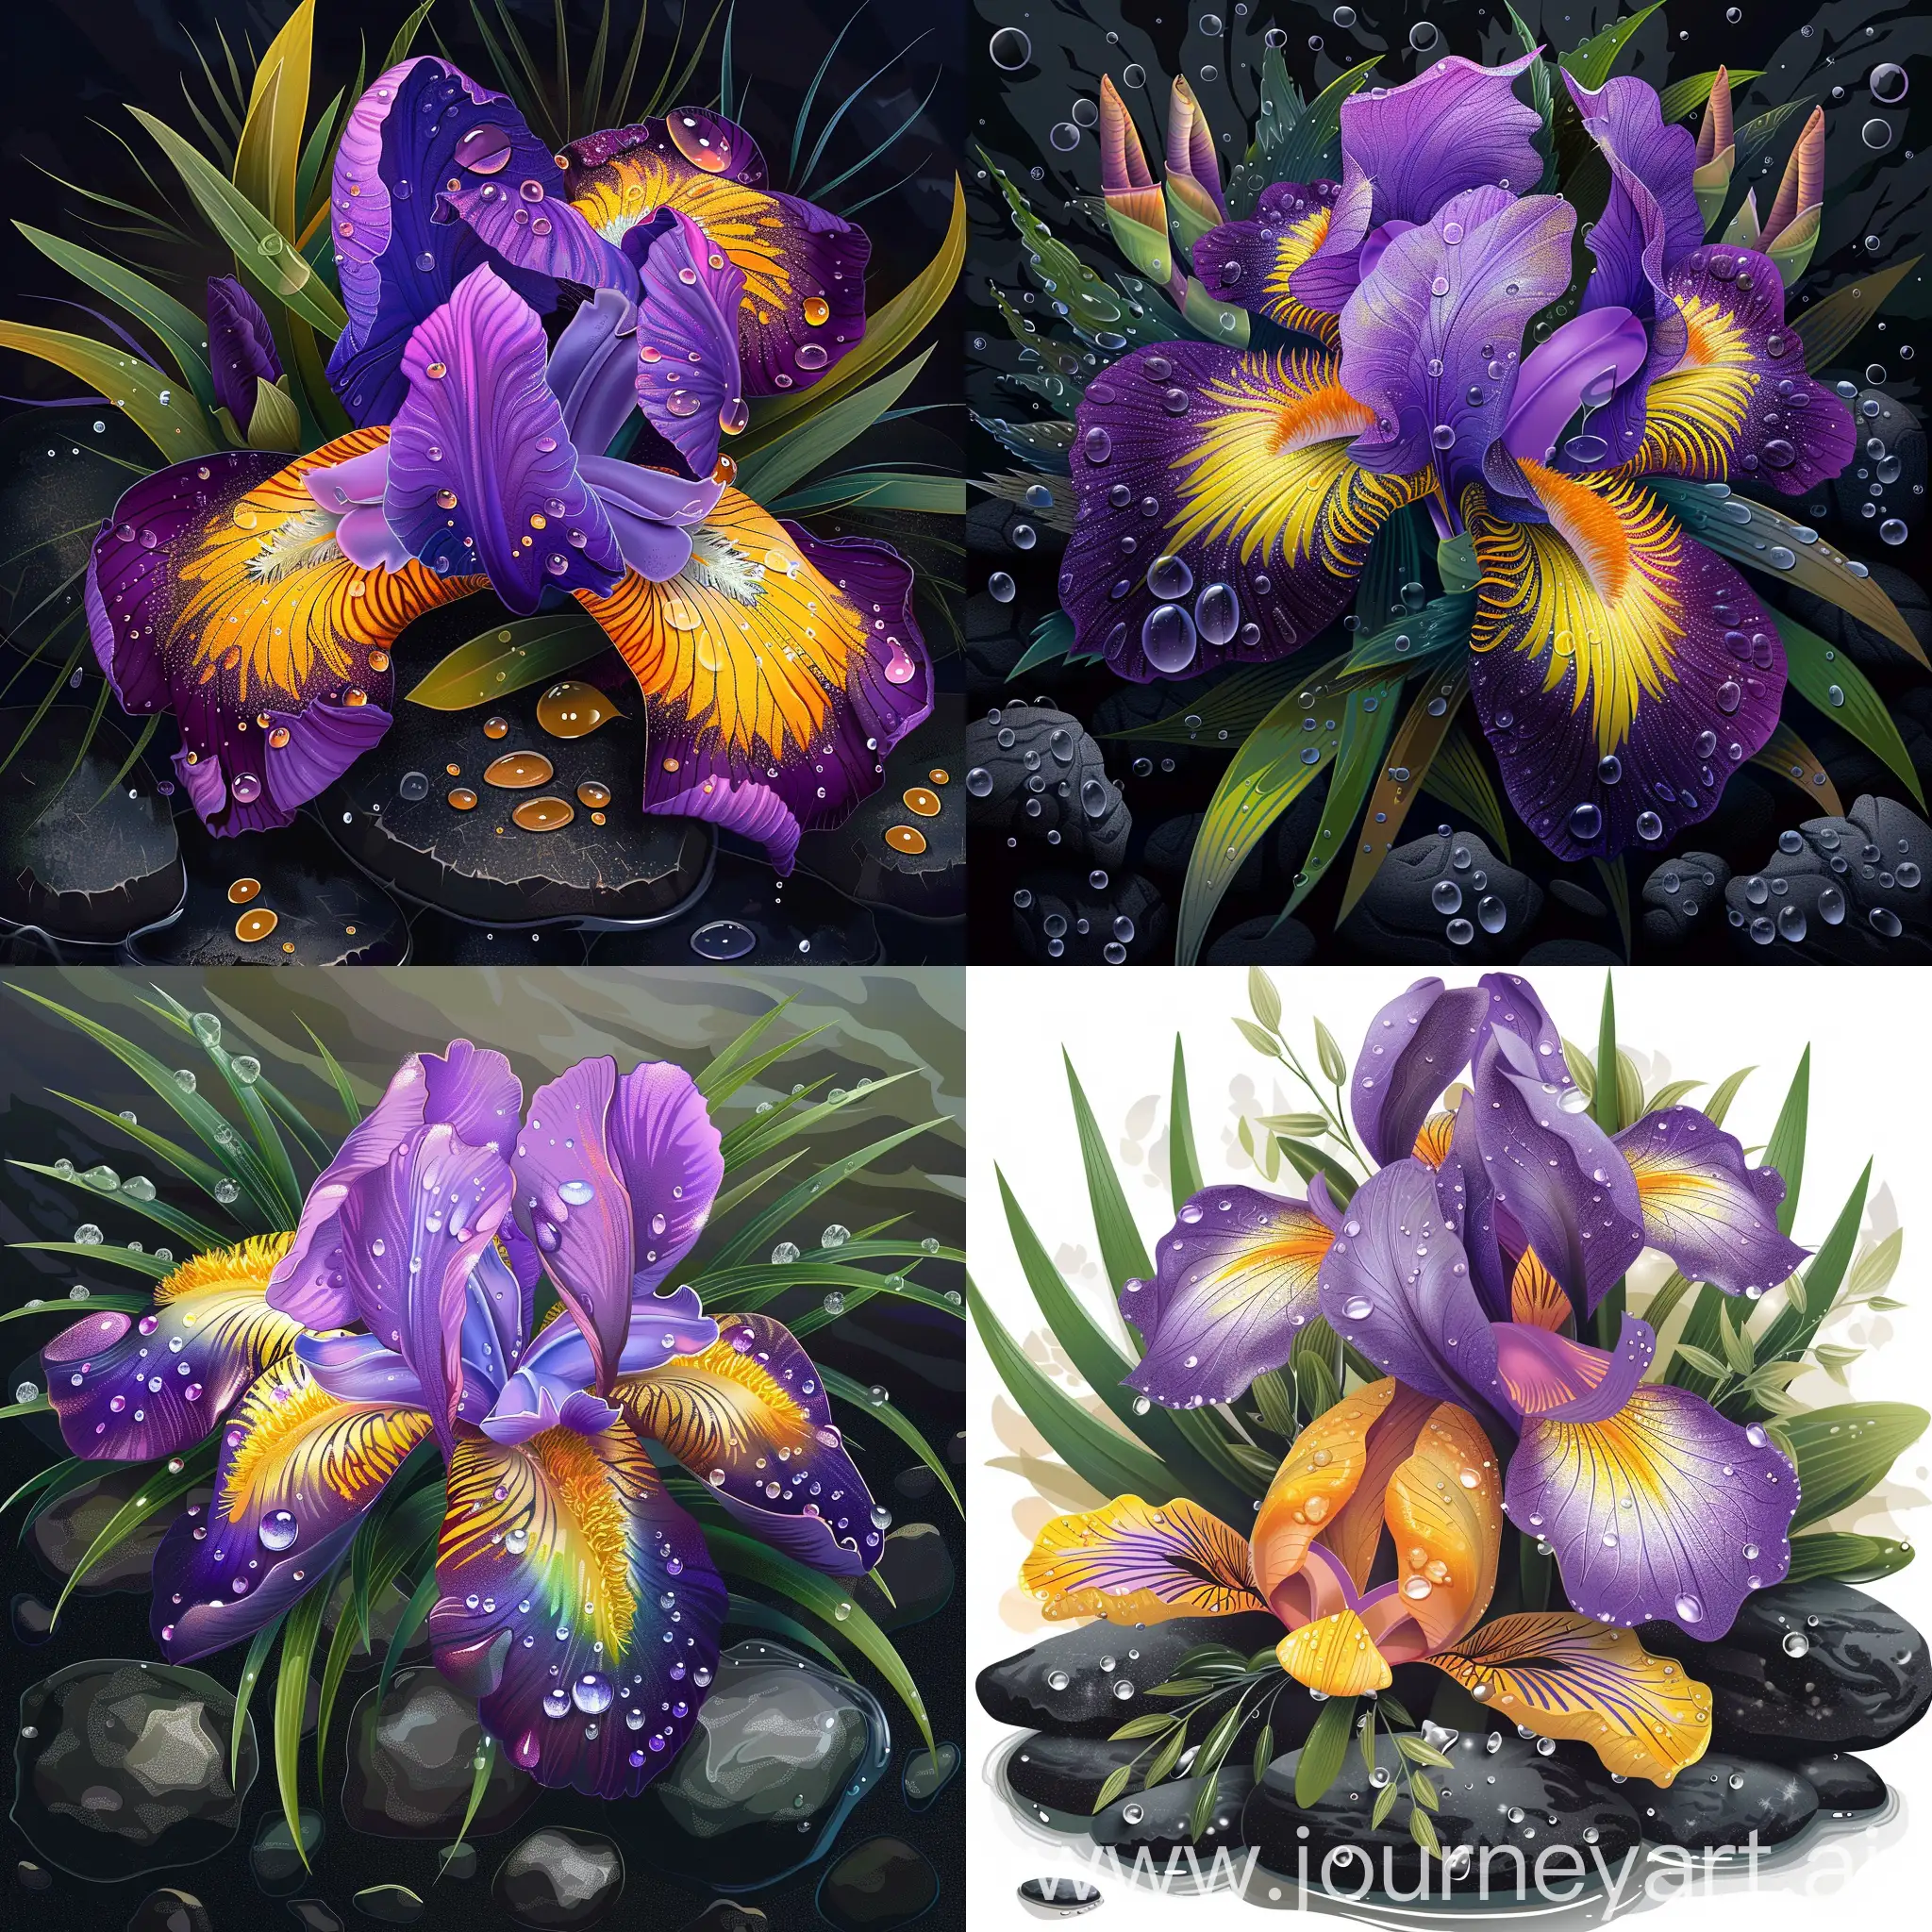 Vibrant-Iris-Flowers-on-Black-Rocks-with-Water-Droplets-Vector-Art